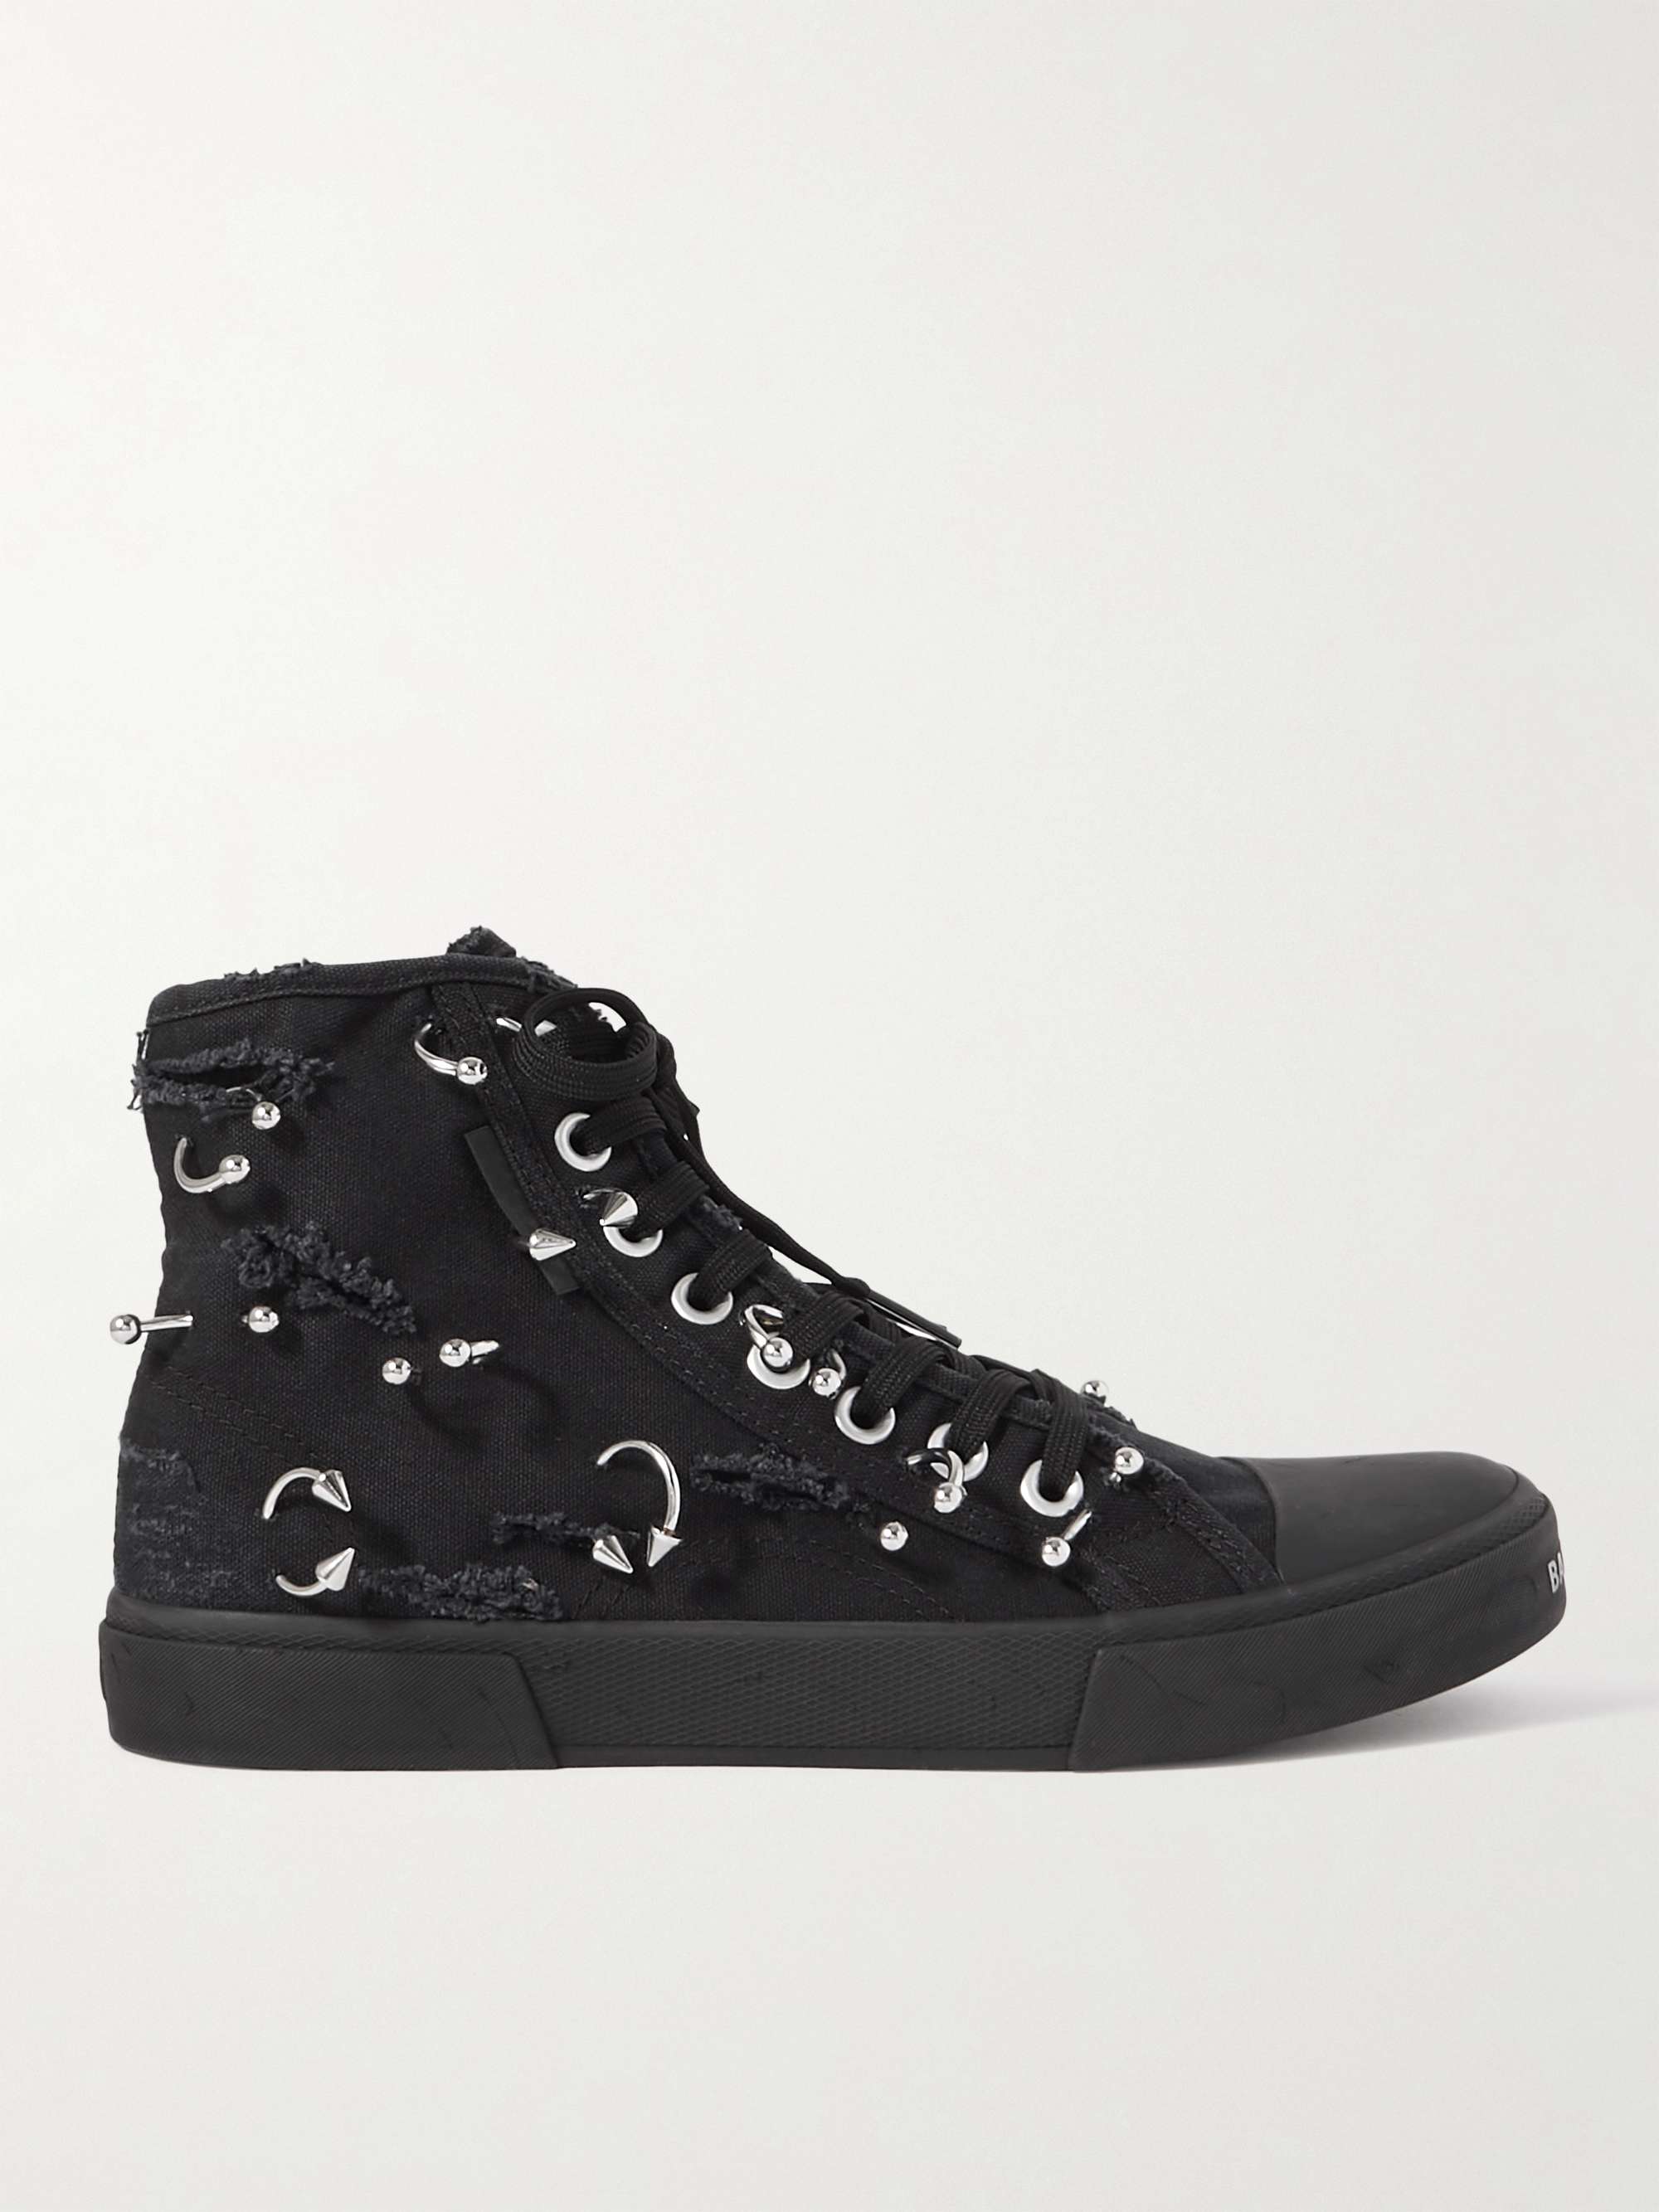 BALENCIAGA Paris Embellished Distressed Canvas High-Top Sneakers for Men |  MR PORTER